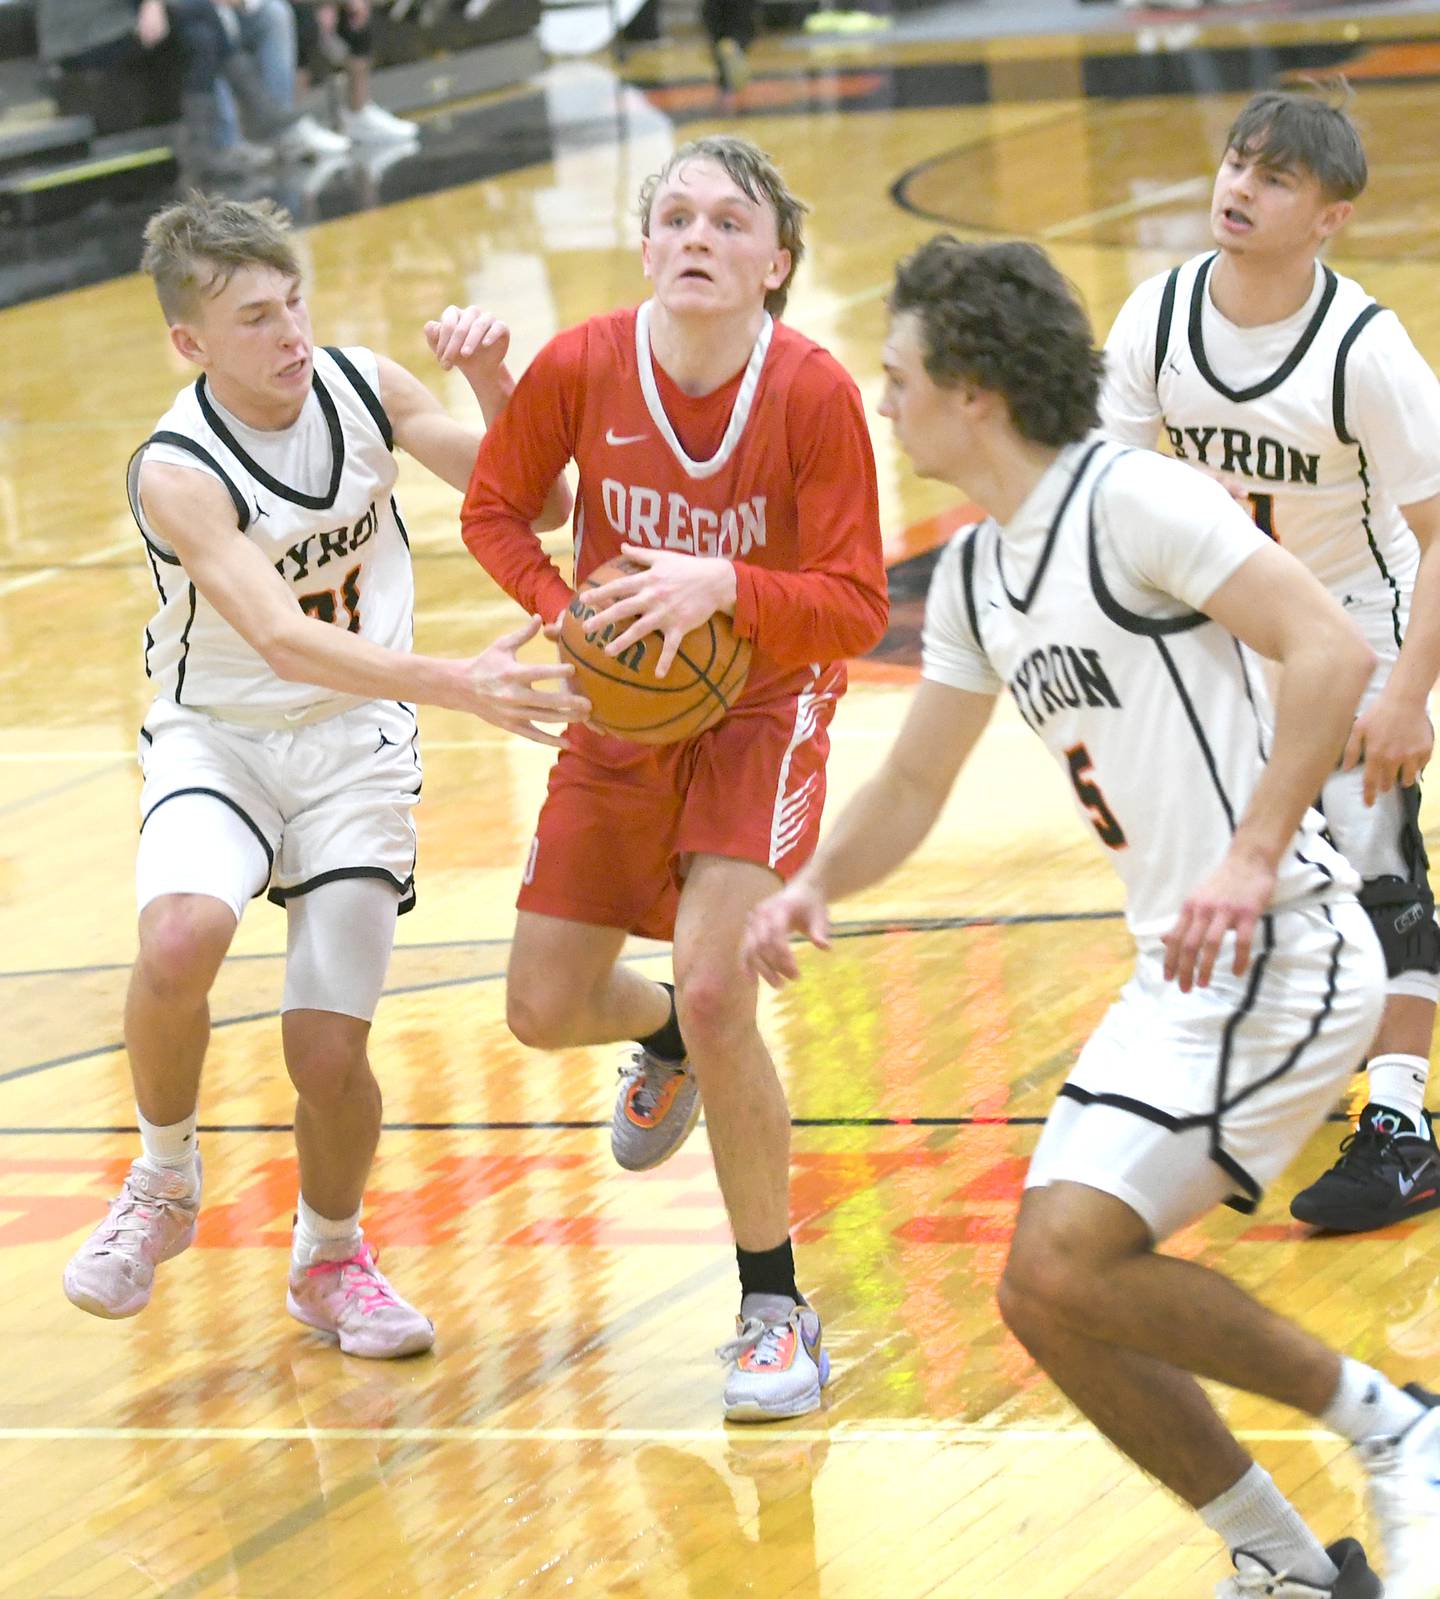 Oregon's Jordan Croegaert drives to the basket as Byron's Cason Newton (21) gets a hand on the ball during a Jan. 20 game in Byron.